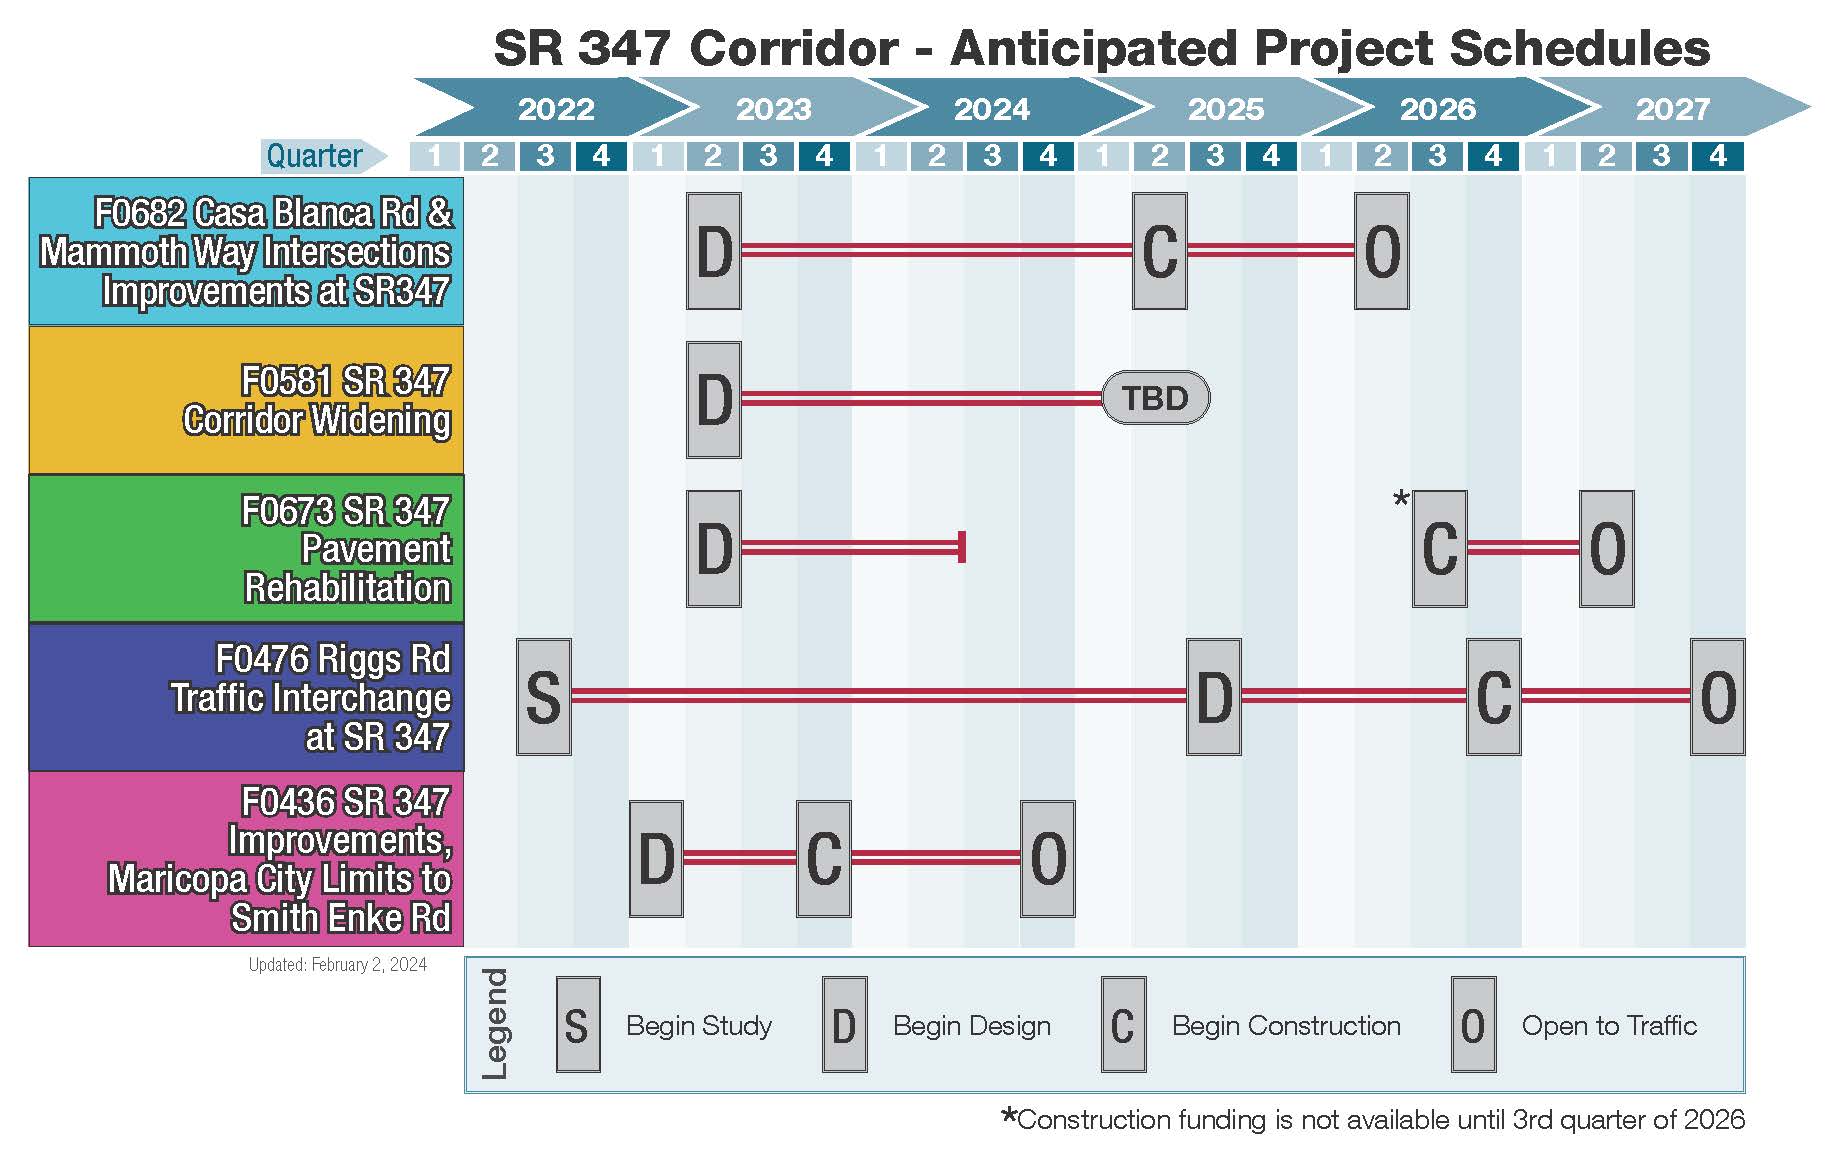 SR 347 Project schedules